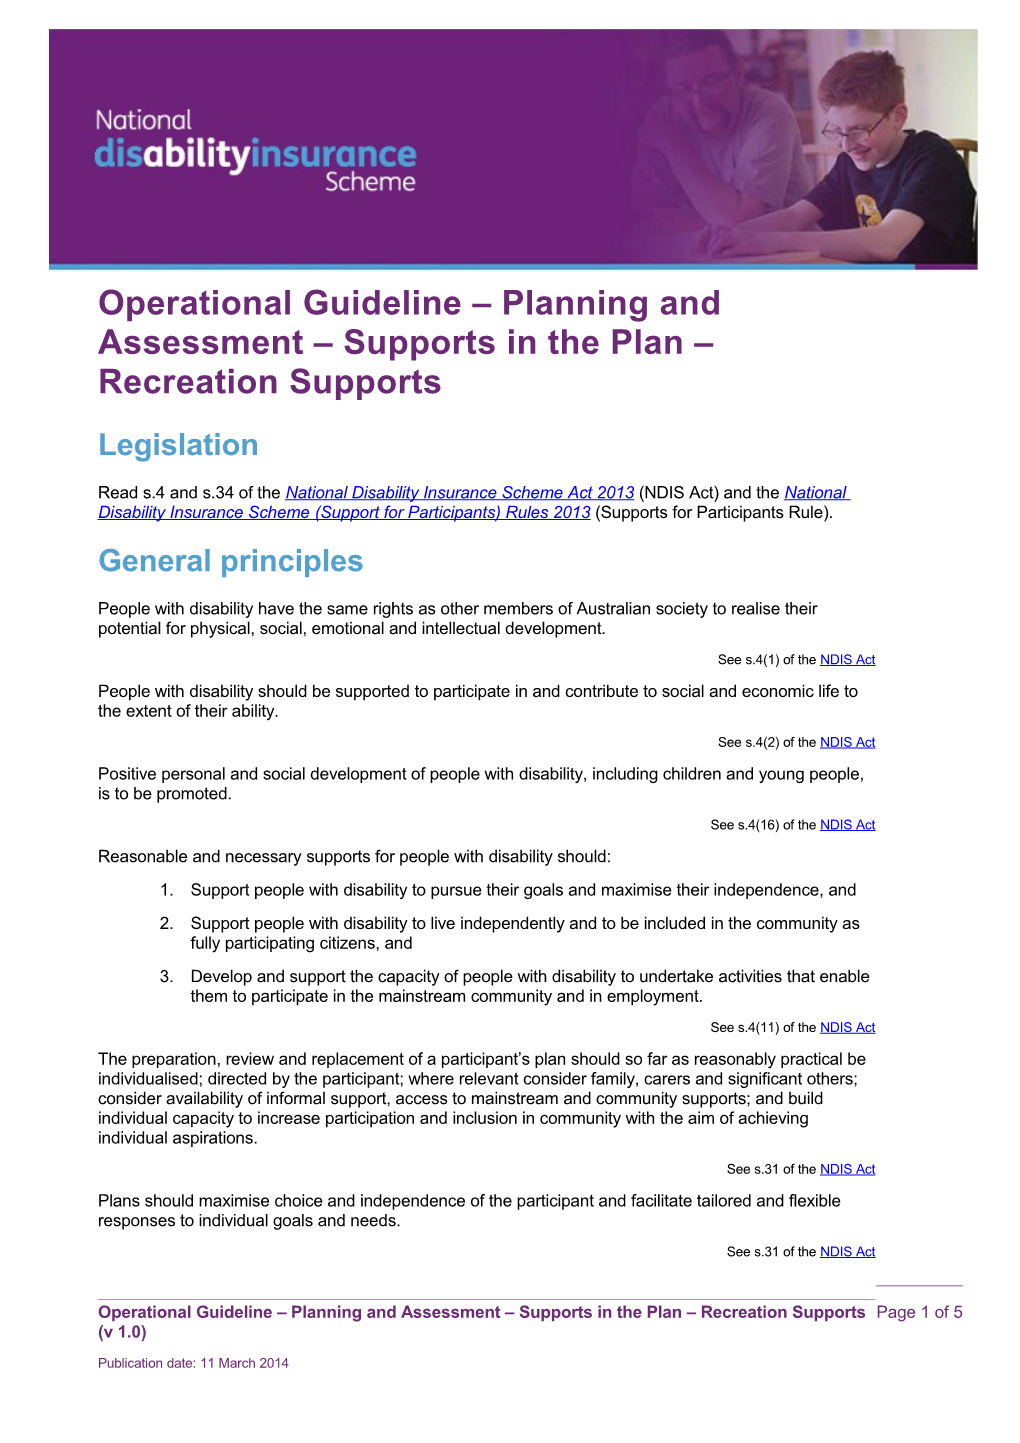 Operational Guideline Planning and Assessment Supports in the Plan Recreation Supports